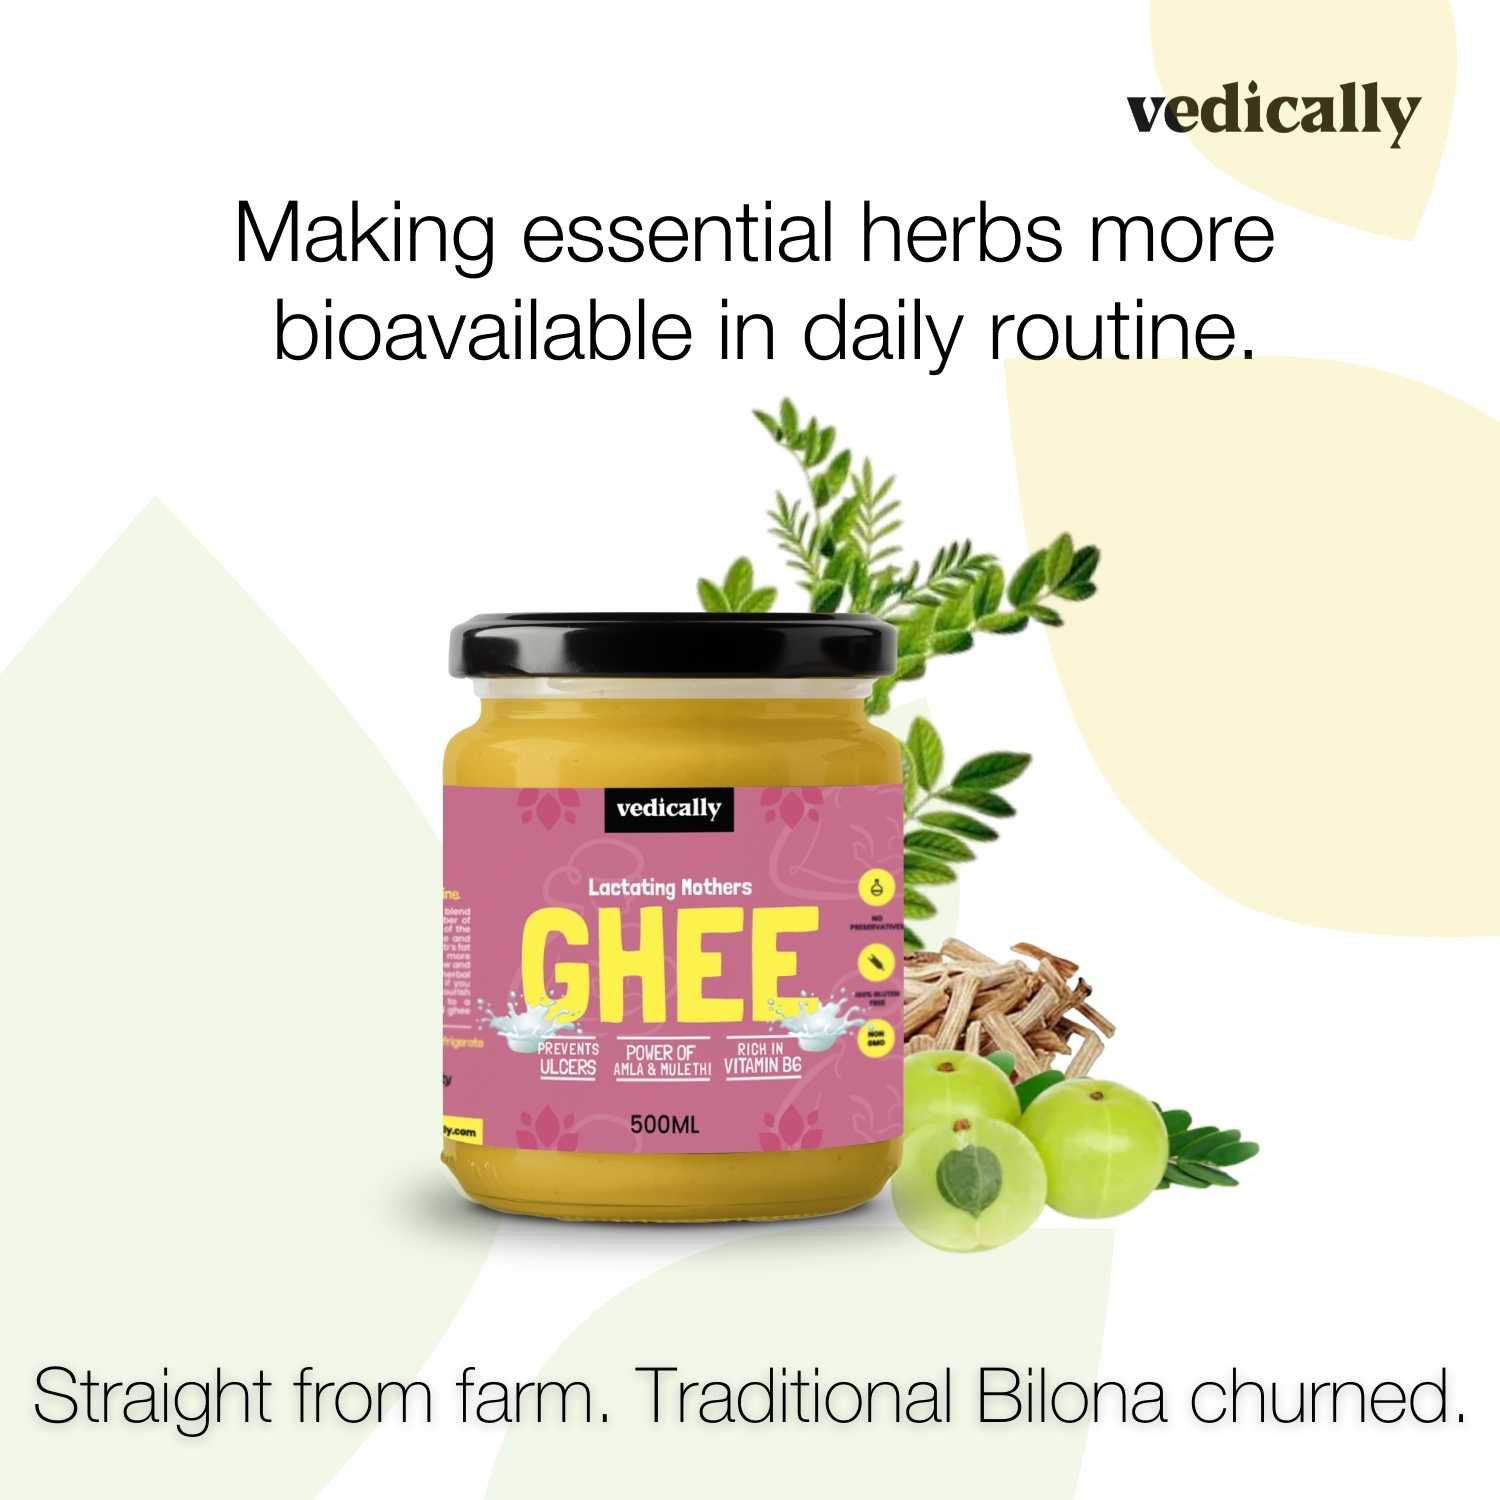 Product: Vedically Lactating Mother’s Ghee